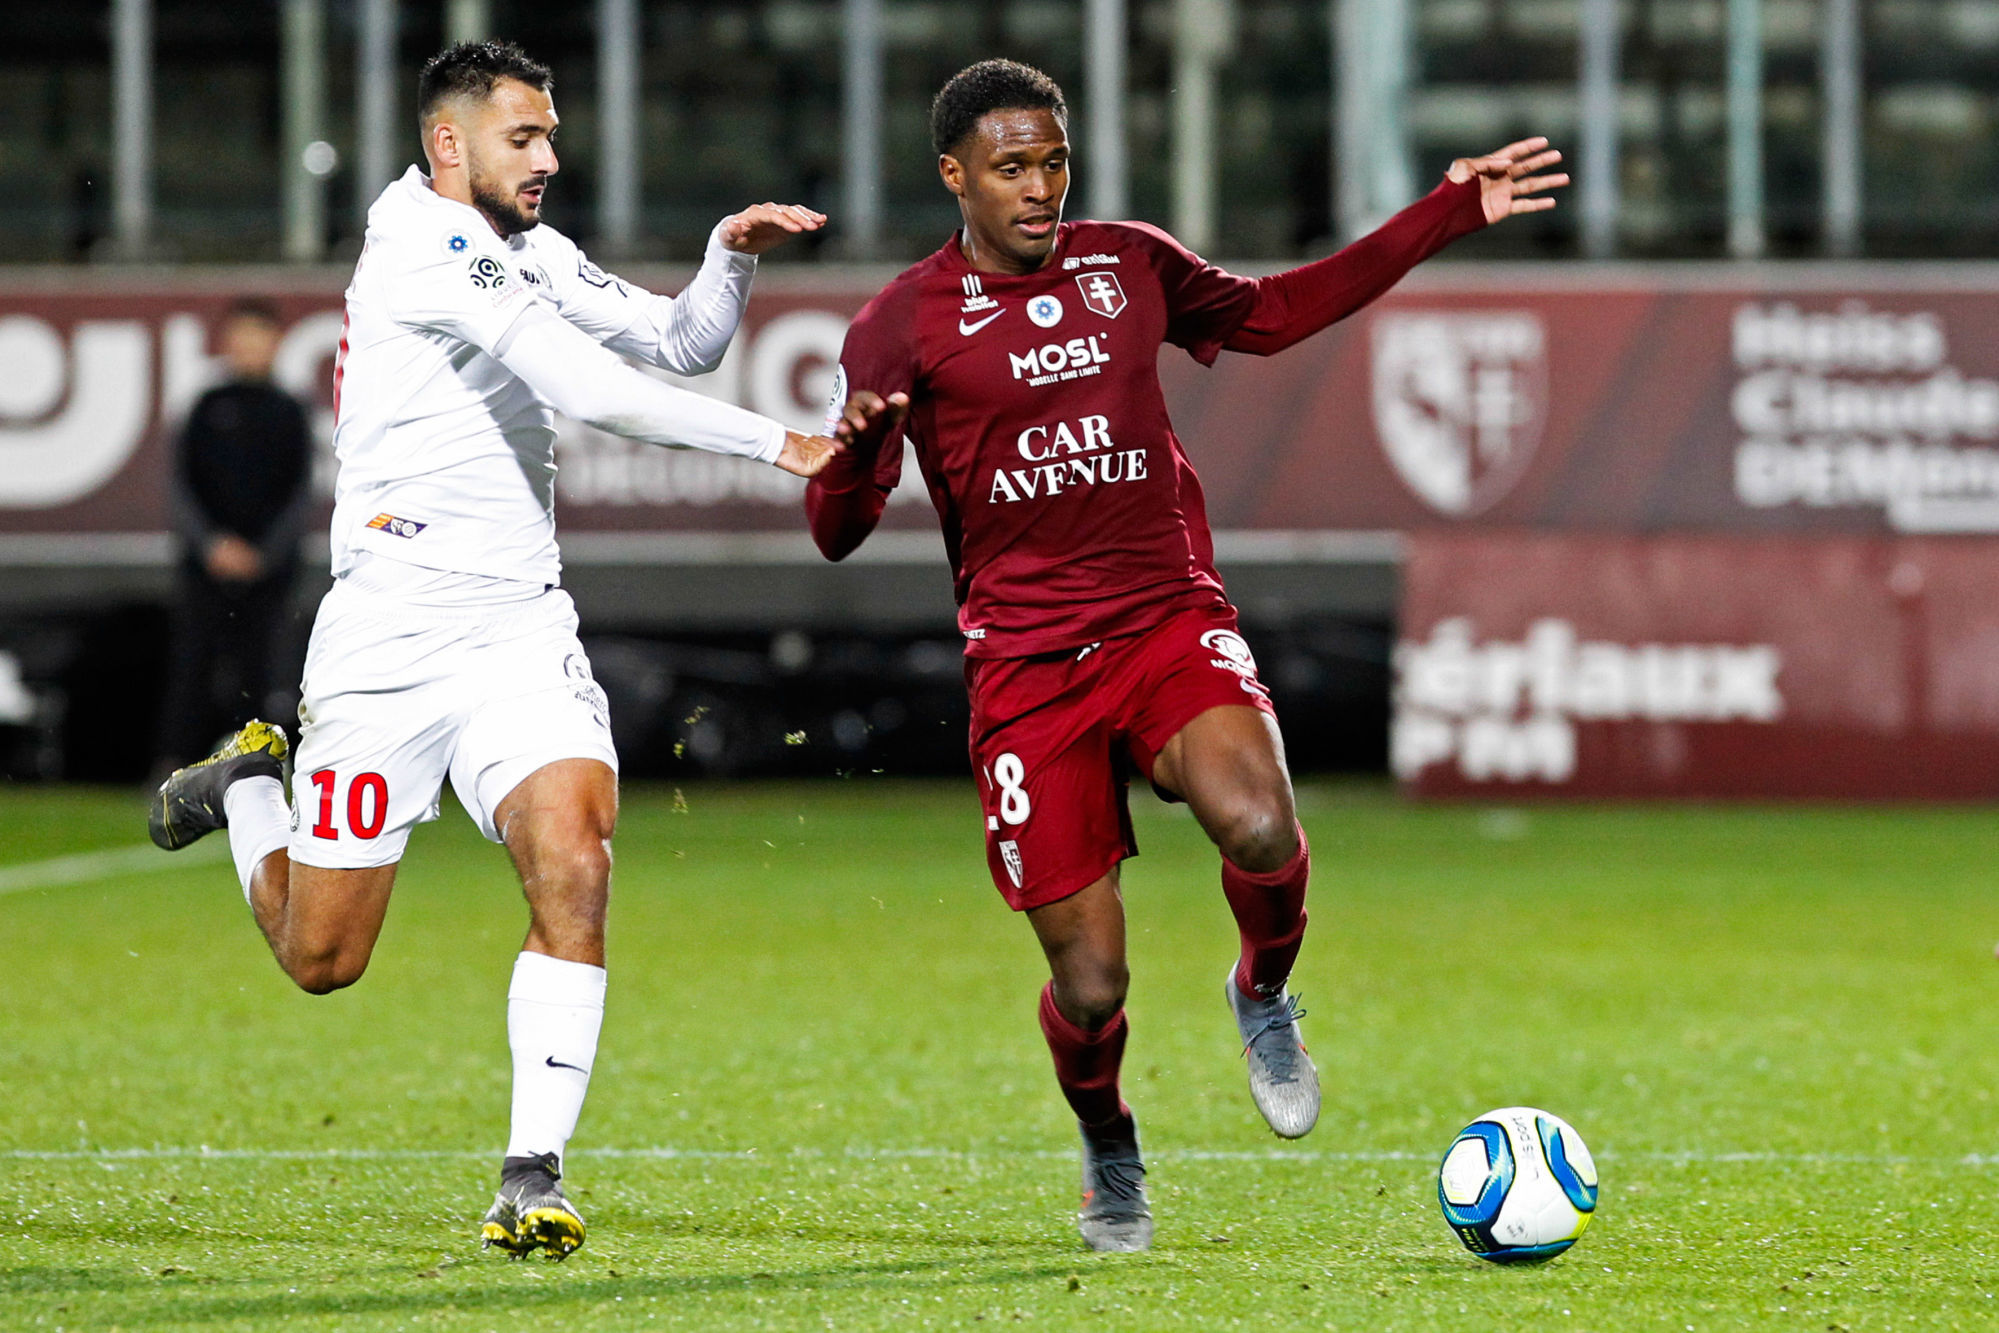 Gaetan Laborde of Montpellier and Manuel Cabit of Metz during the Ligue 1 match between FC Metz and Montpellier HSC at Stade Saint-Symphorien on November 2, 2019 in Metz, France. (Photo by Fred Marvaux/Icon Sport) - Gaetan LABORDE - Manuel CABIT - Stade Saint-Symphorien - Metz (France)